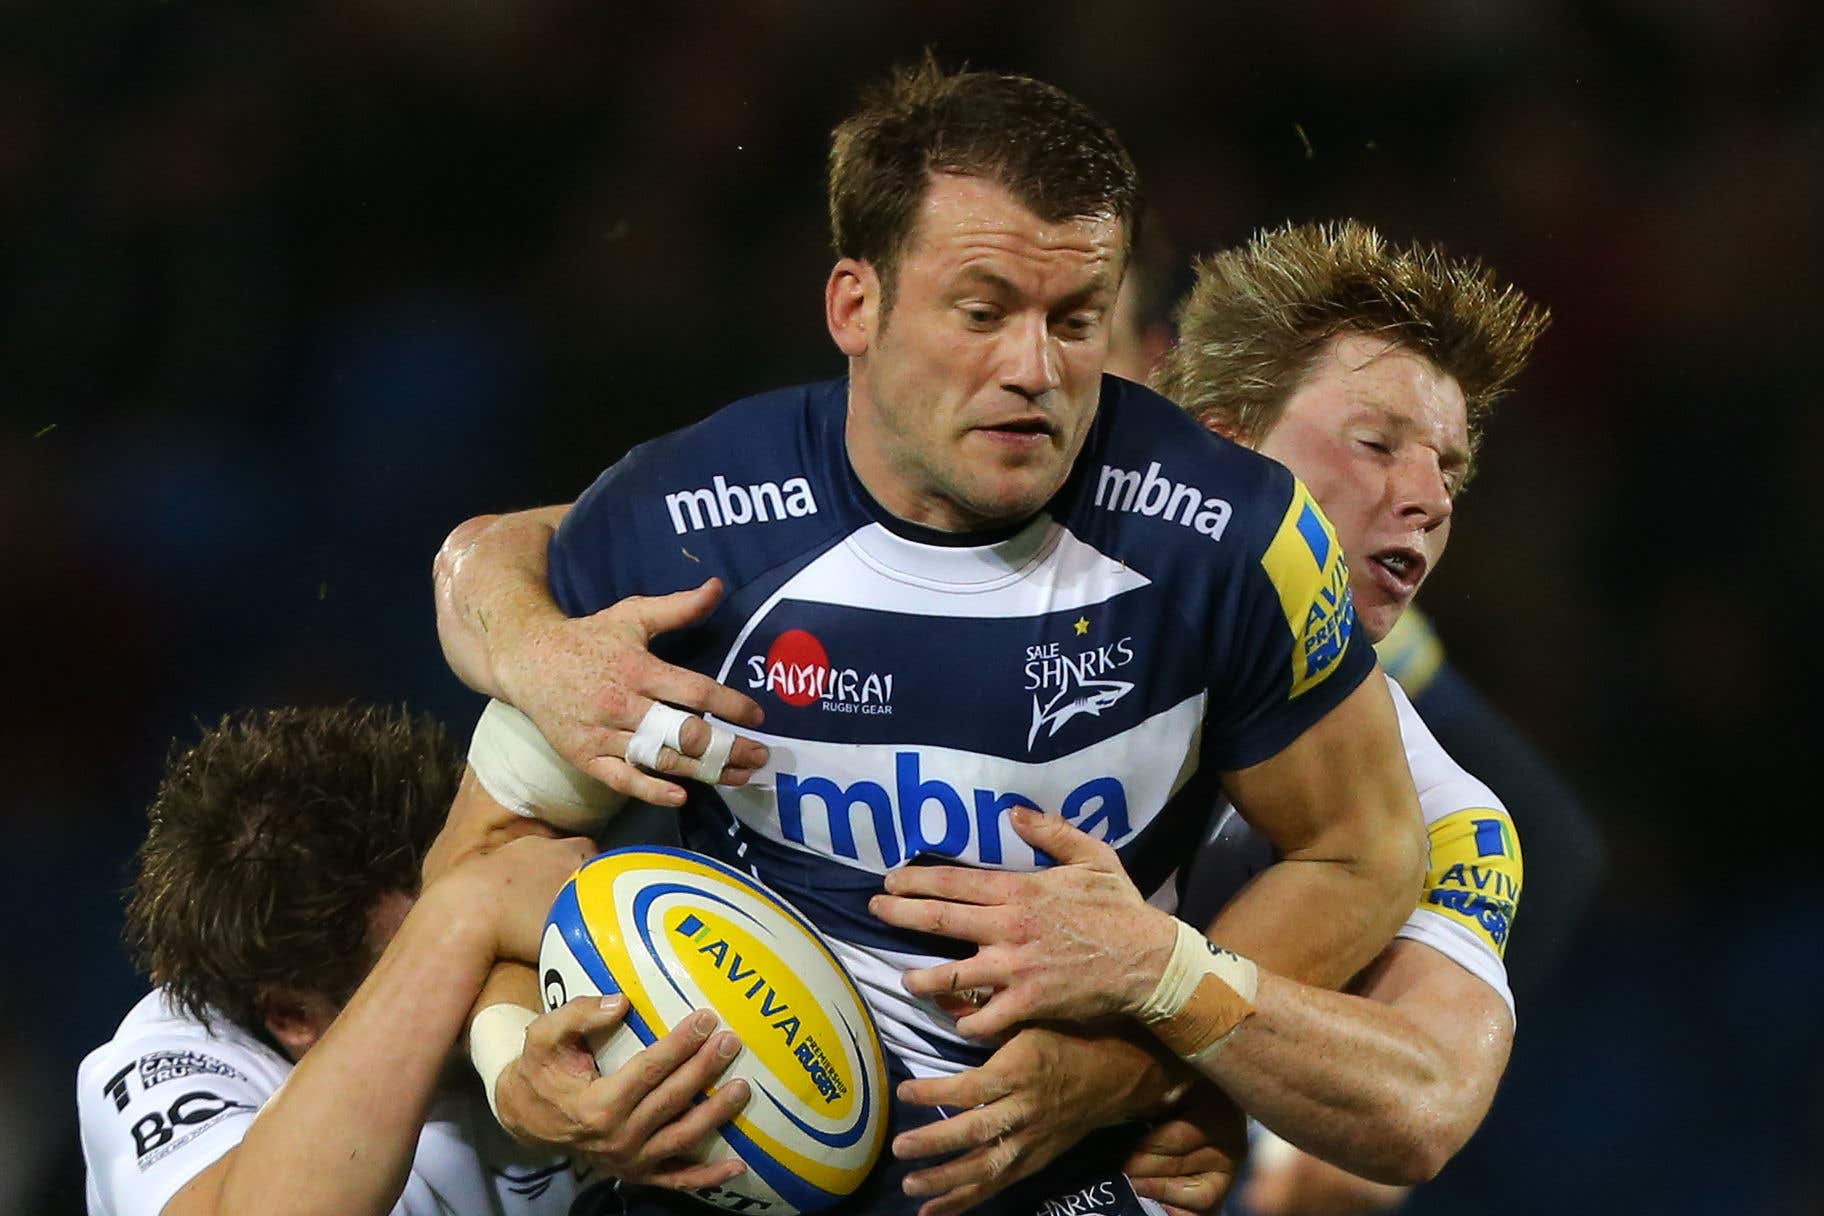 Mark Cueto was part of Sale’s 2006 Premiership title-winning team (Dave Thompson/PA)